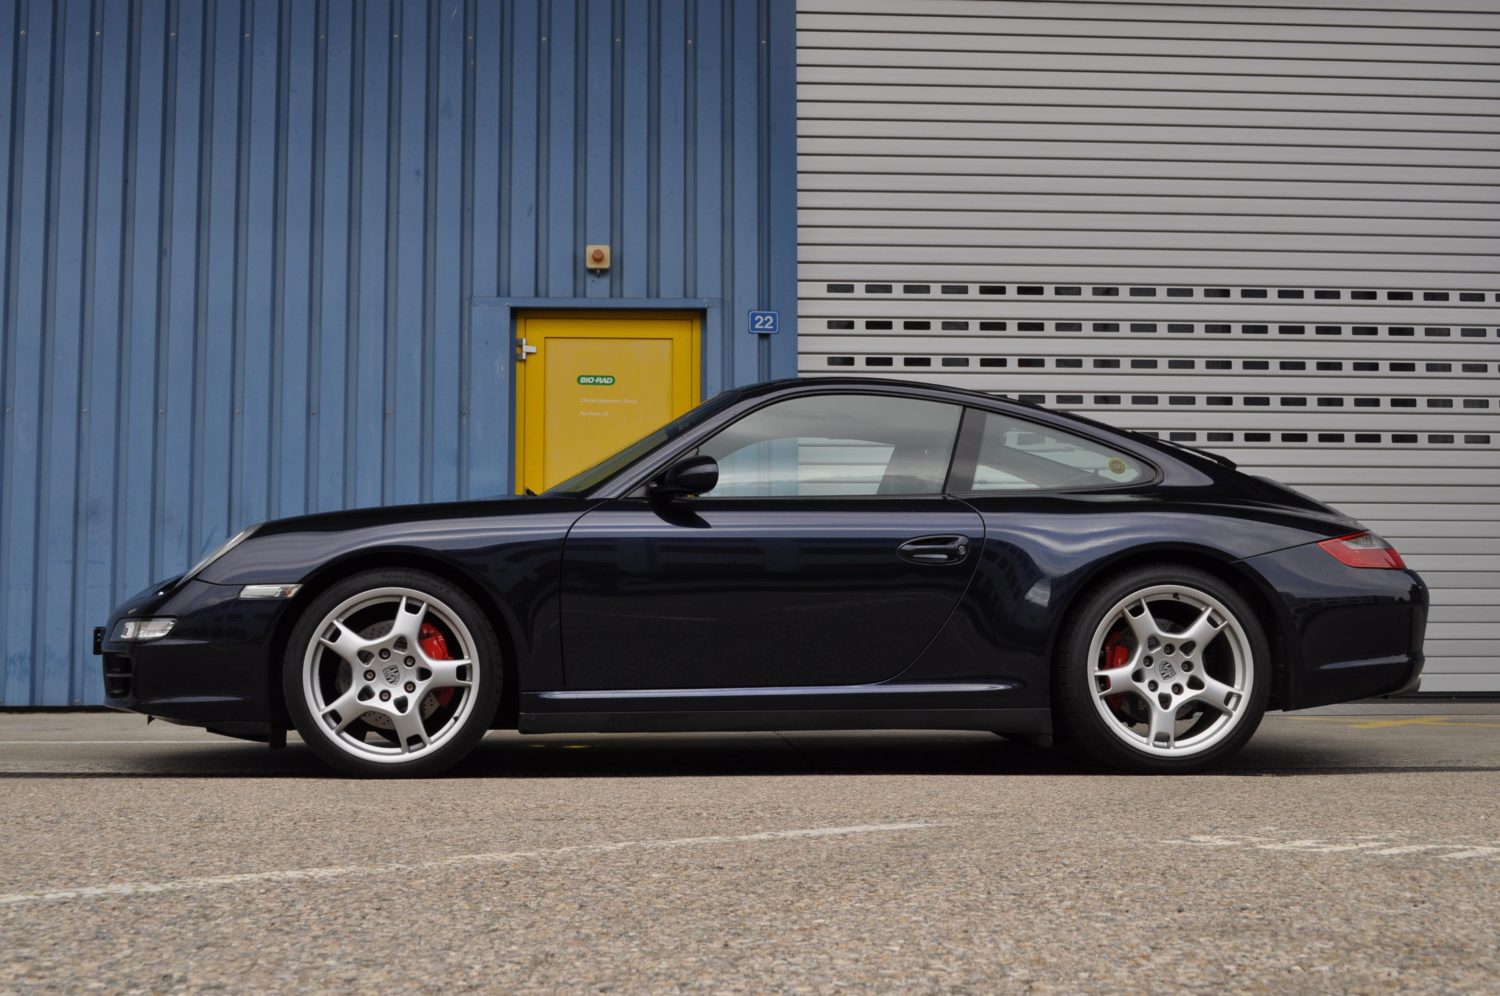 Porsche 911 Buyer's Guide: Should you buy a used one? - eCarGuides